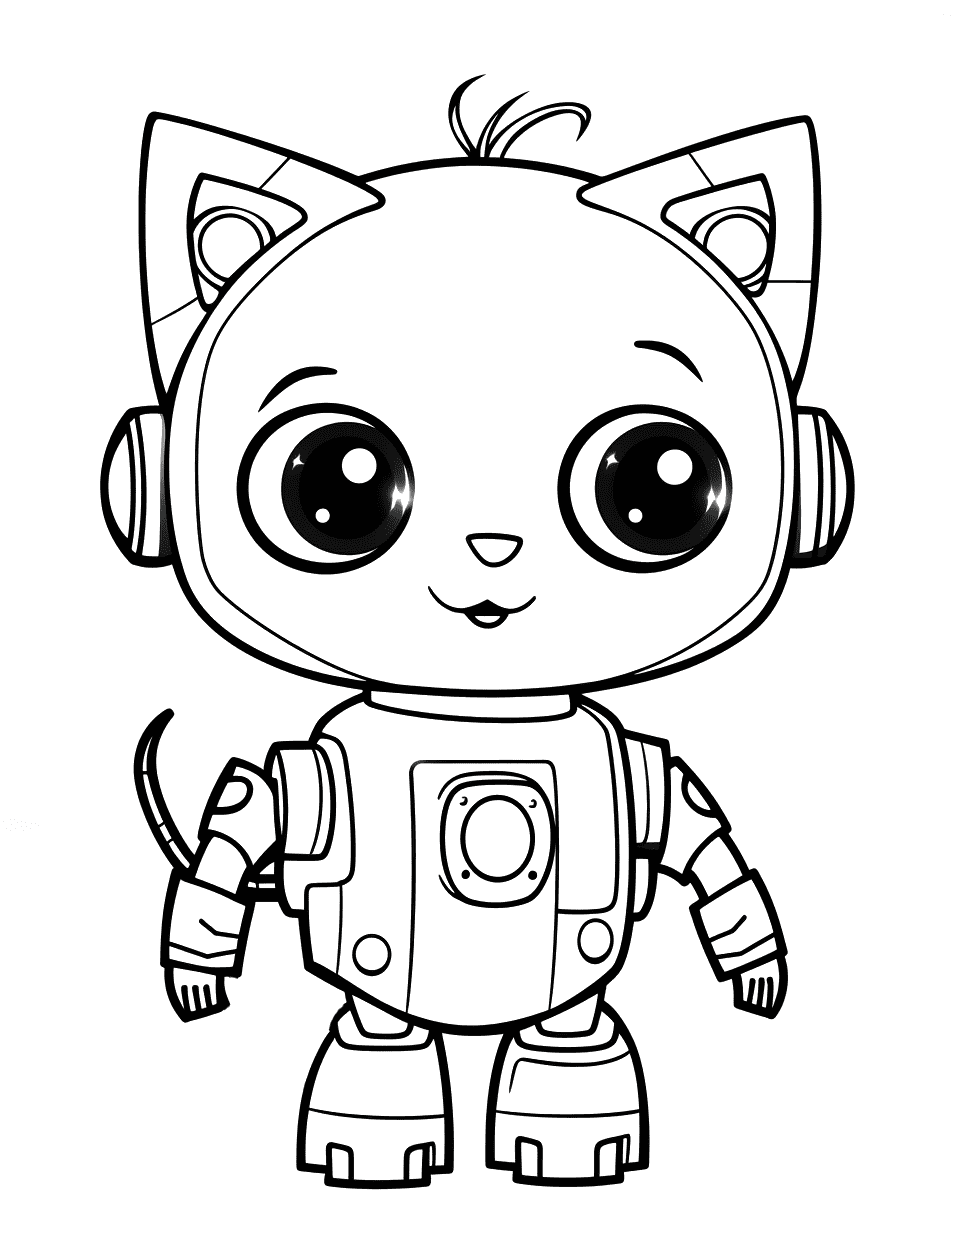 Cute Kitten Robot Coloring Page - A small, adorable kitten type robot designed after cats.